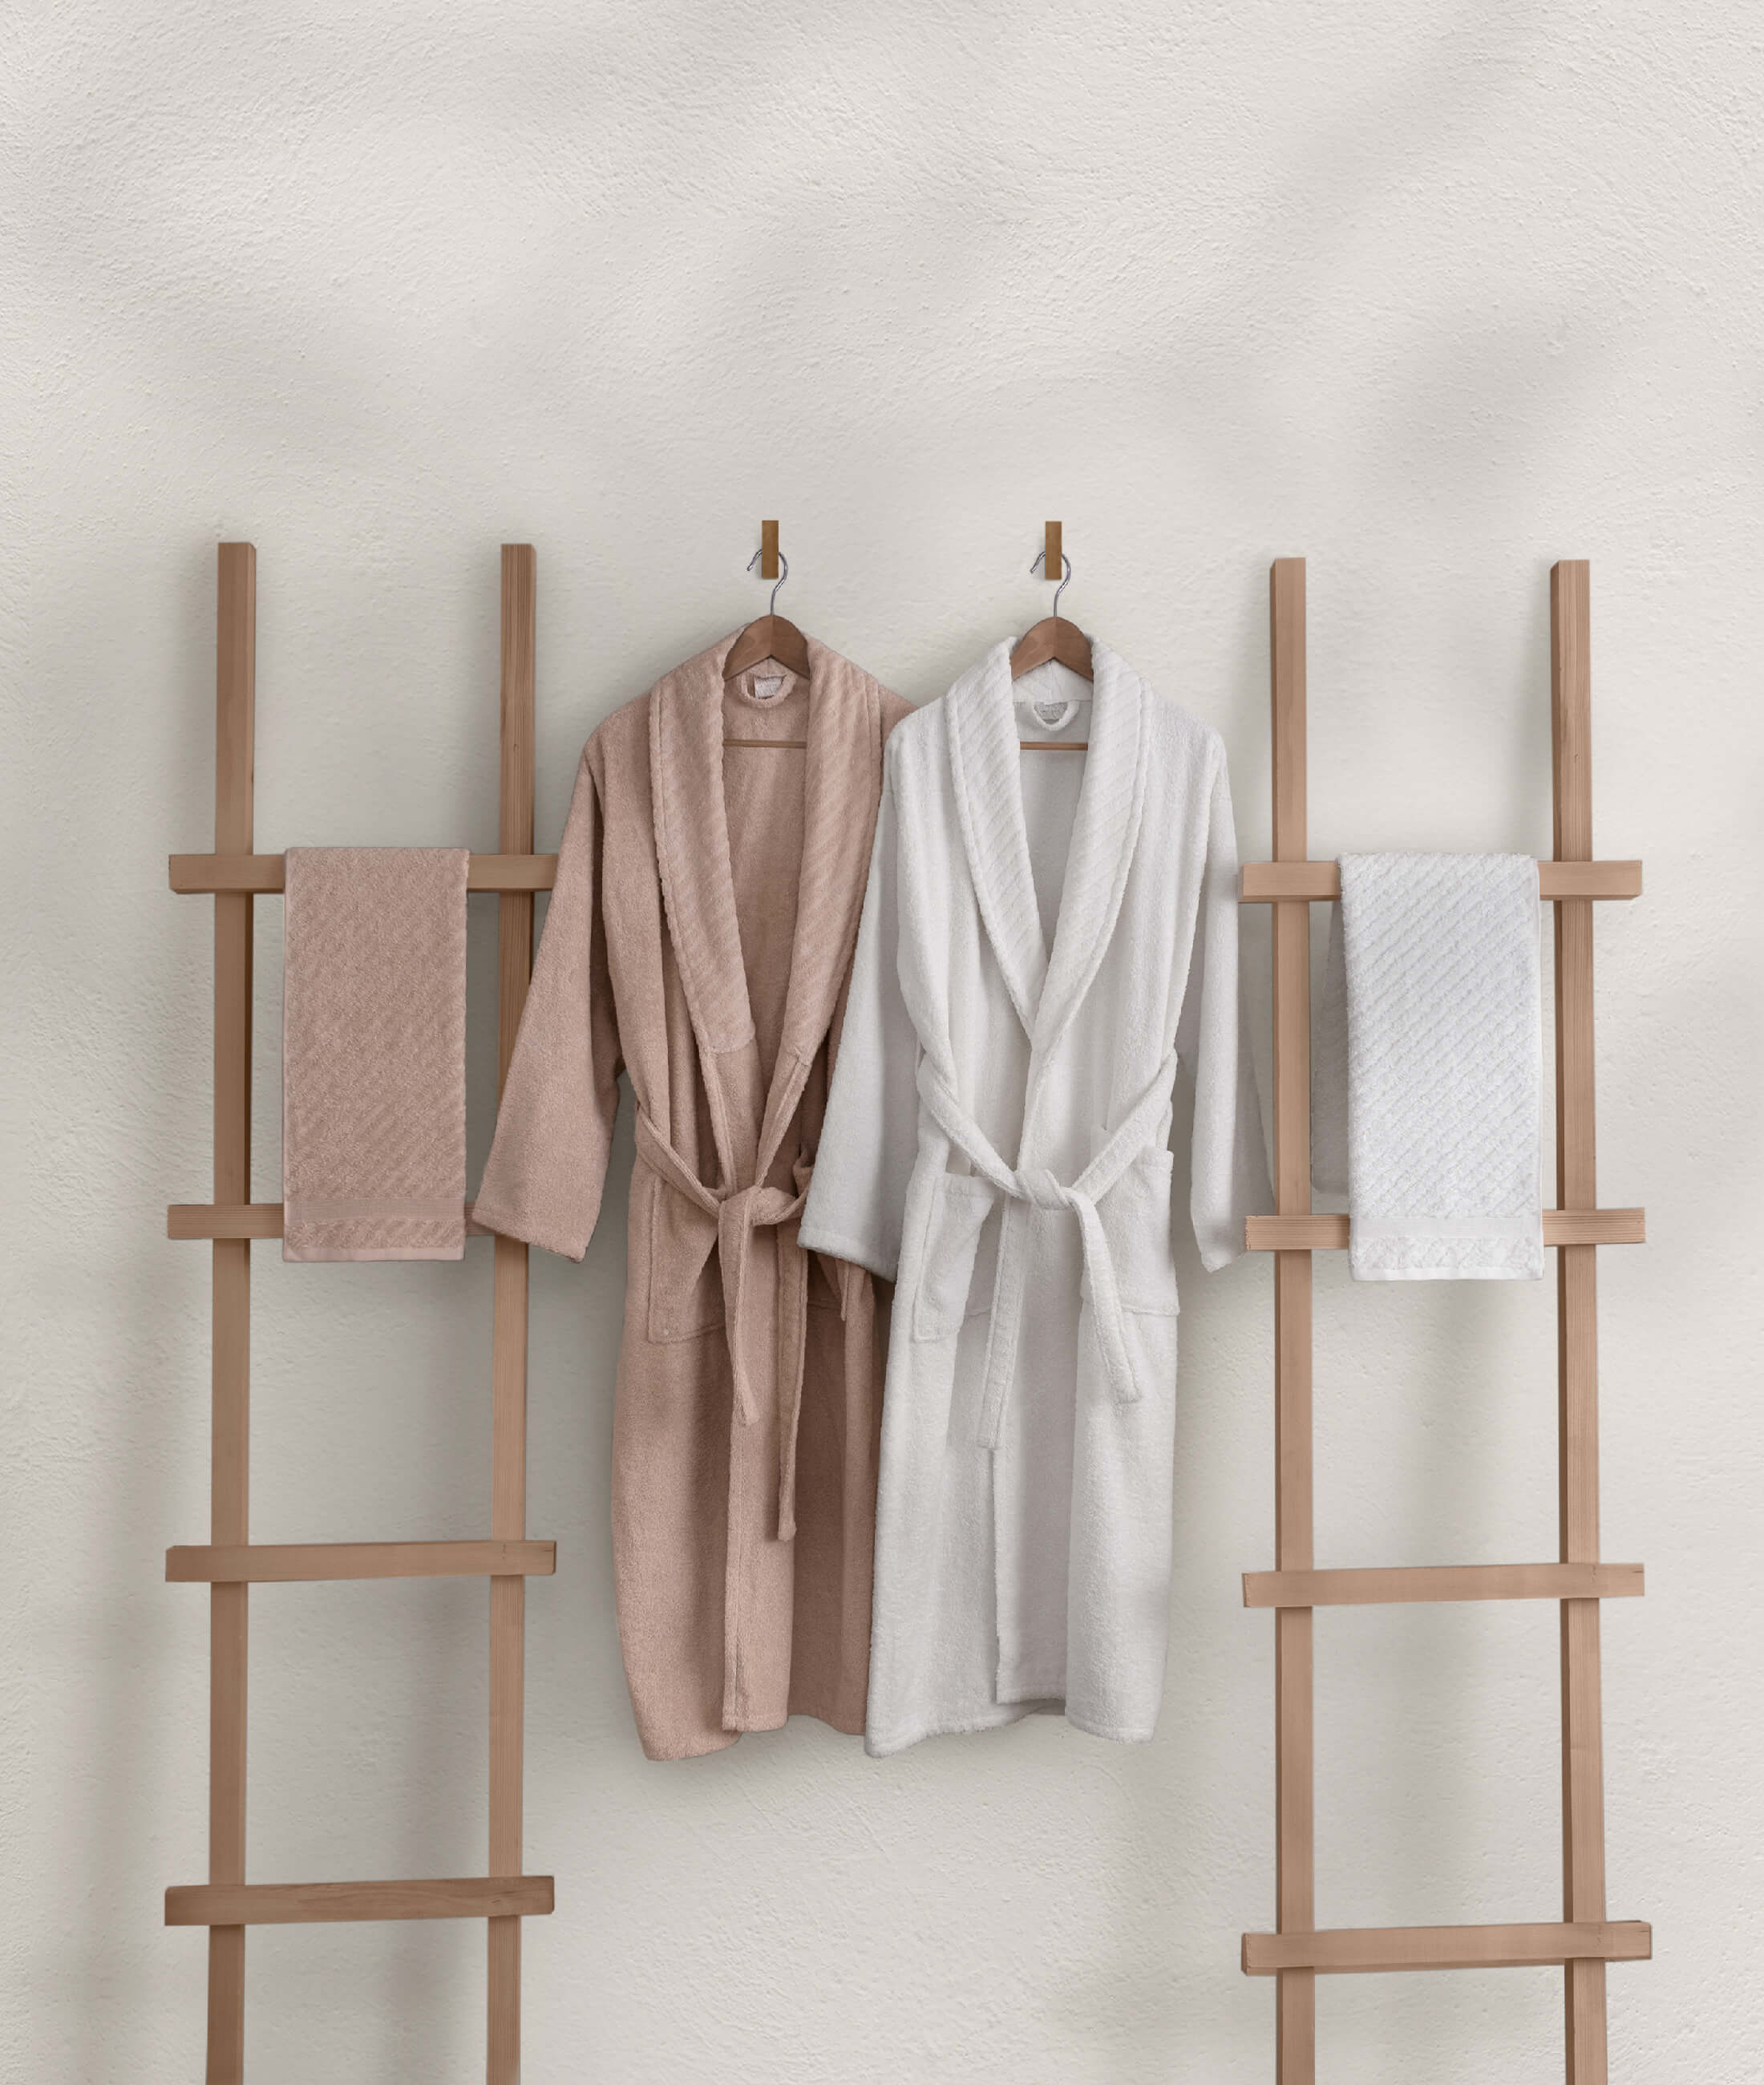 Lycian Salmon-White Family of 4 Bathrobes and Towel Set 2 Bathrobes 2 Towels 1063A